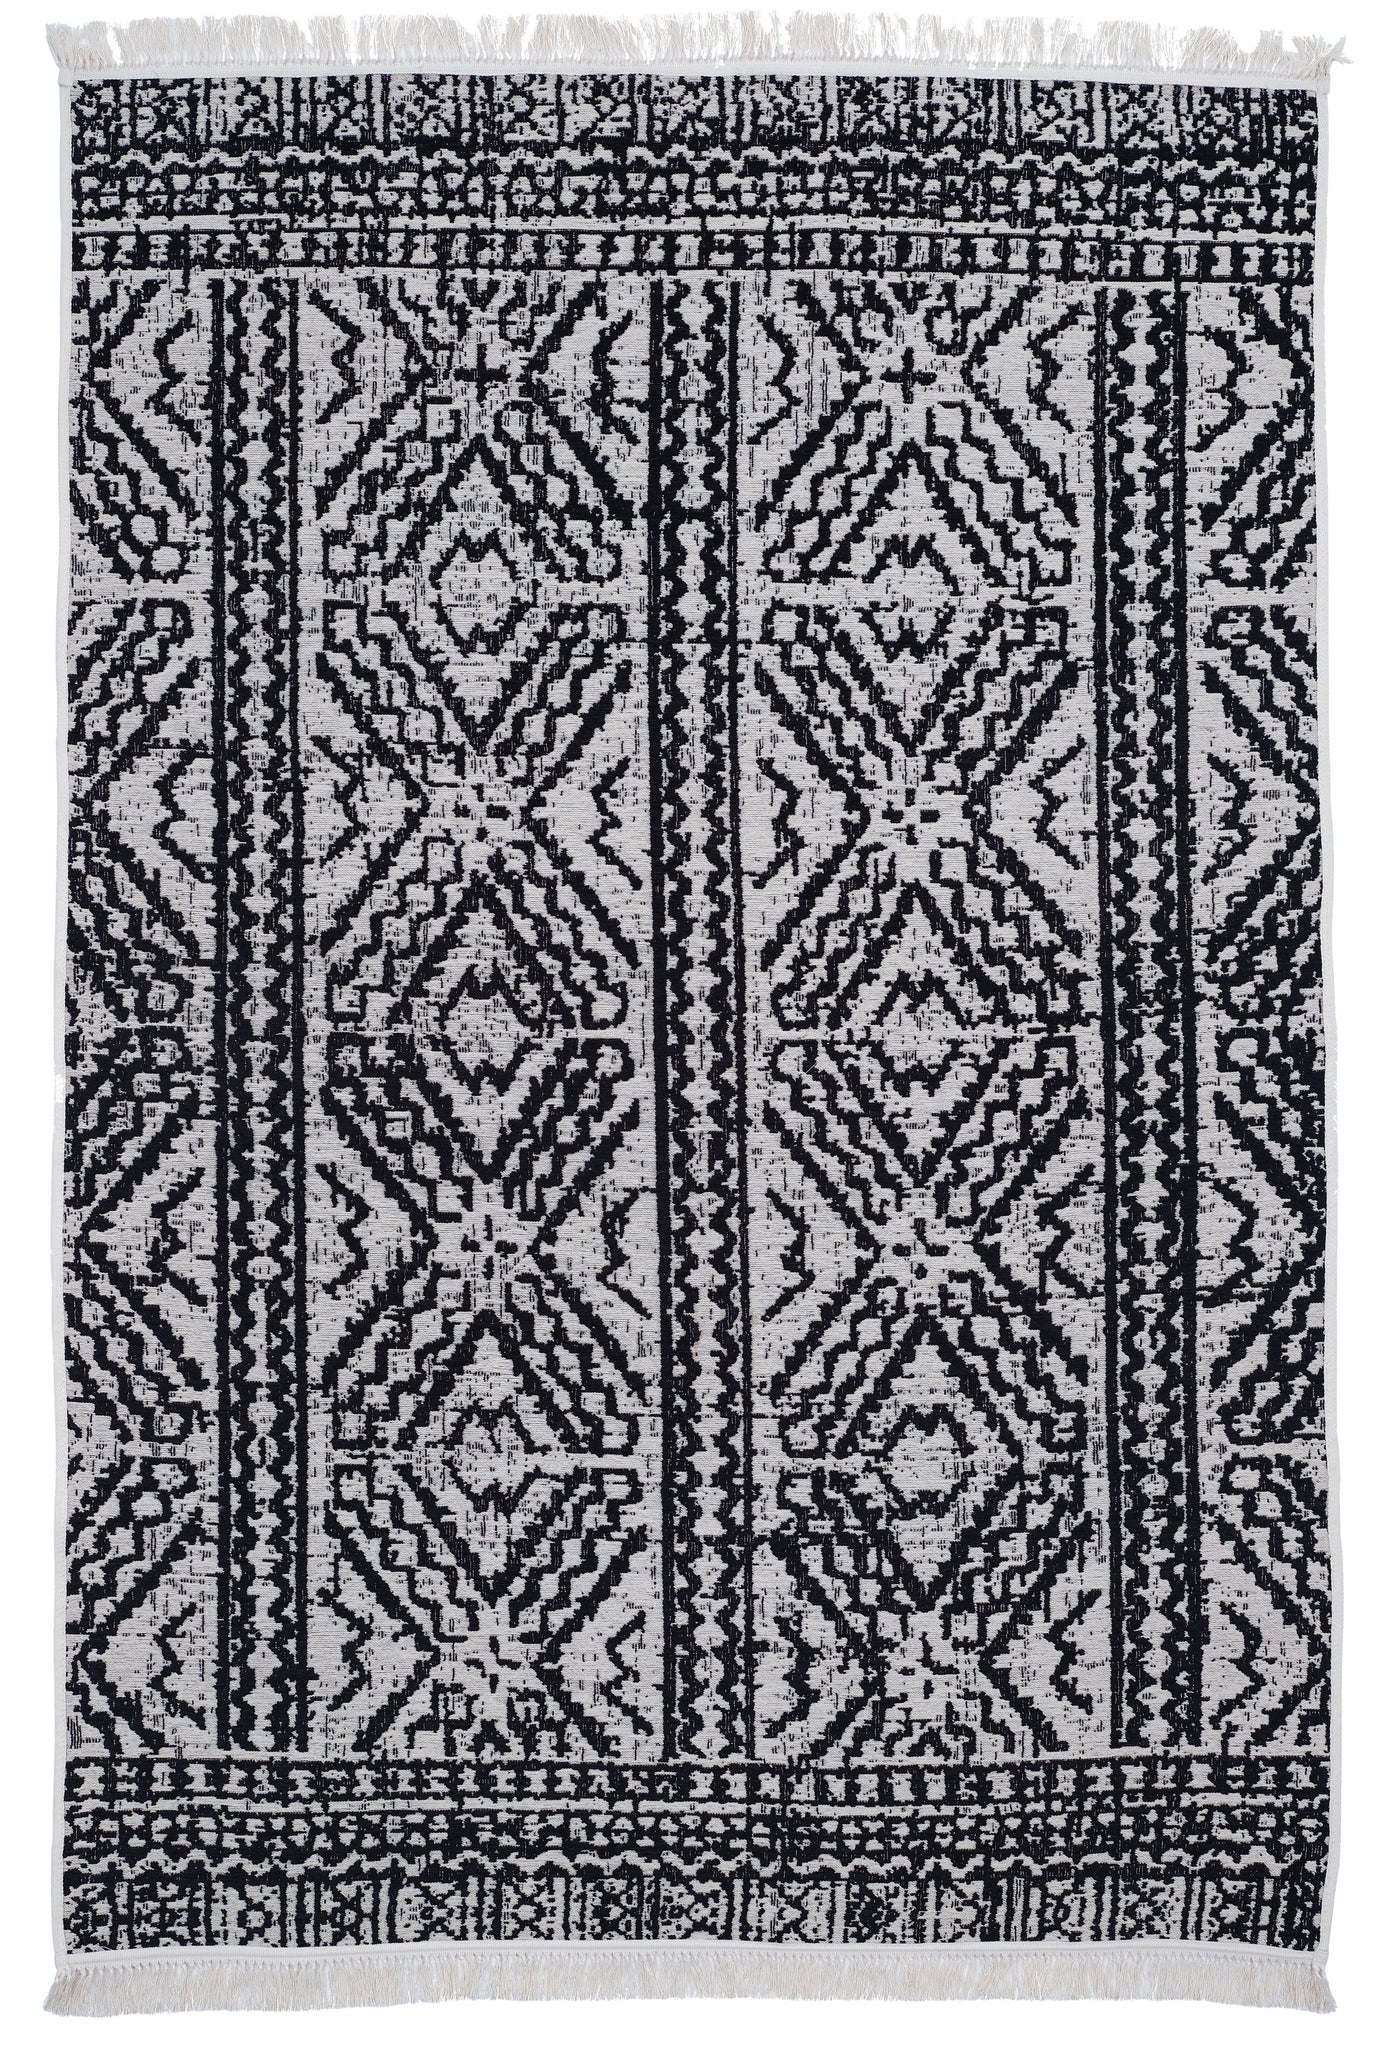 Washable Area rug | Simon & Yildirim Reversible Play | Black & White | 5x8 | By MotherRuggers.com | Machine Washable | Jacquard Woven | Uniquely Reversible | Pet Friendly | Kid Friendly | Machine Wash | Line Dry | Living Room | Covered Patio | Entry Way | Bedroom | High-Traffic | Three-year warranty with proper care | Shake or light Vacuum | Machine Wash as needed | Dry Flat or Line Dry | Dries fast